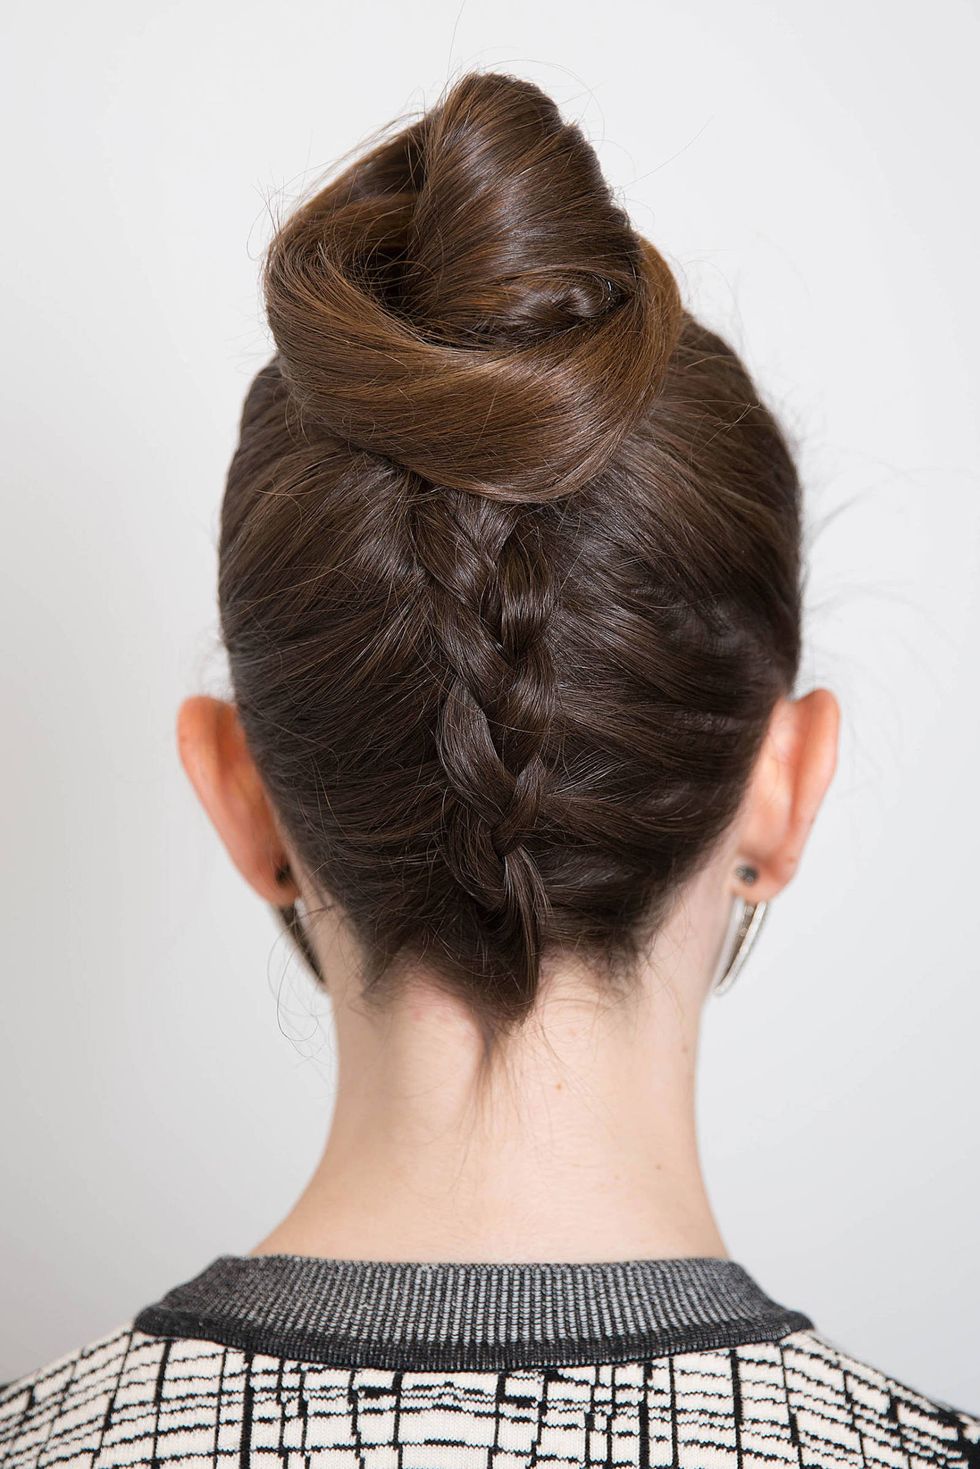 braid turned top knot final